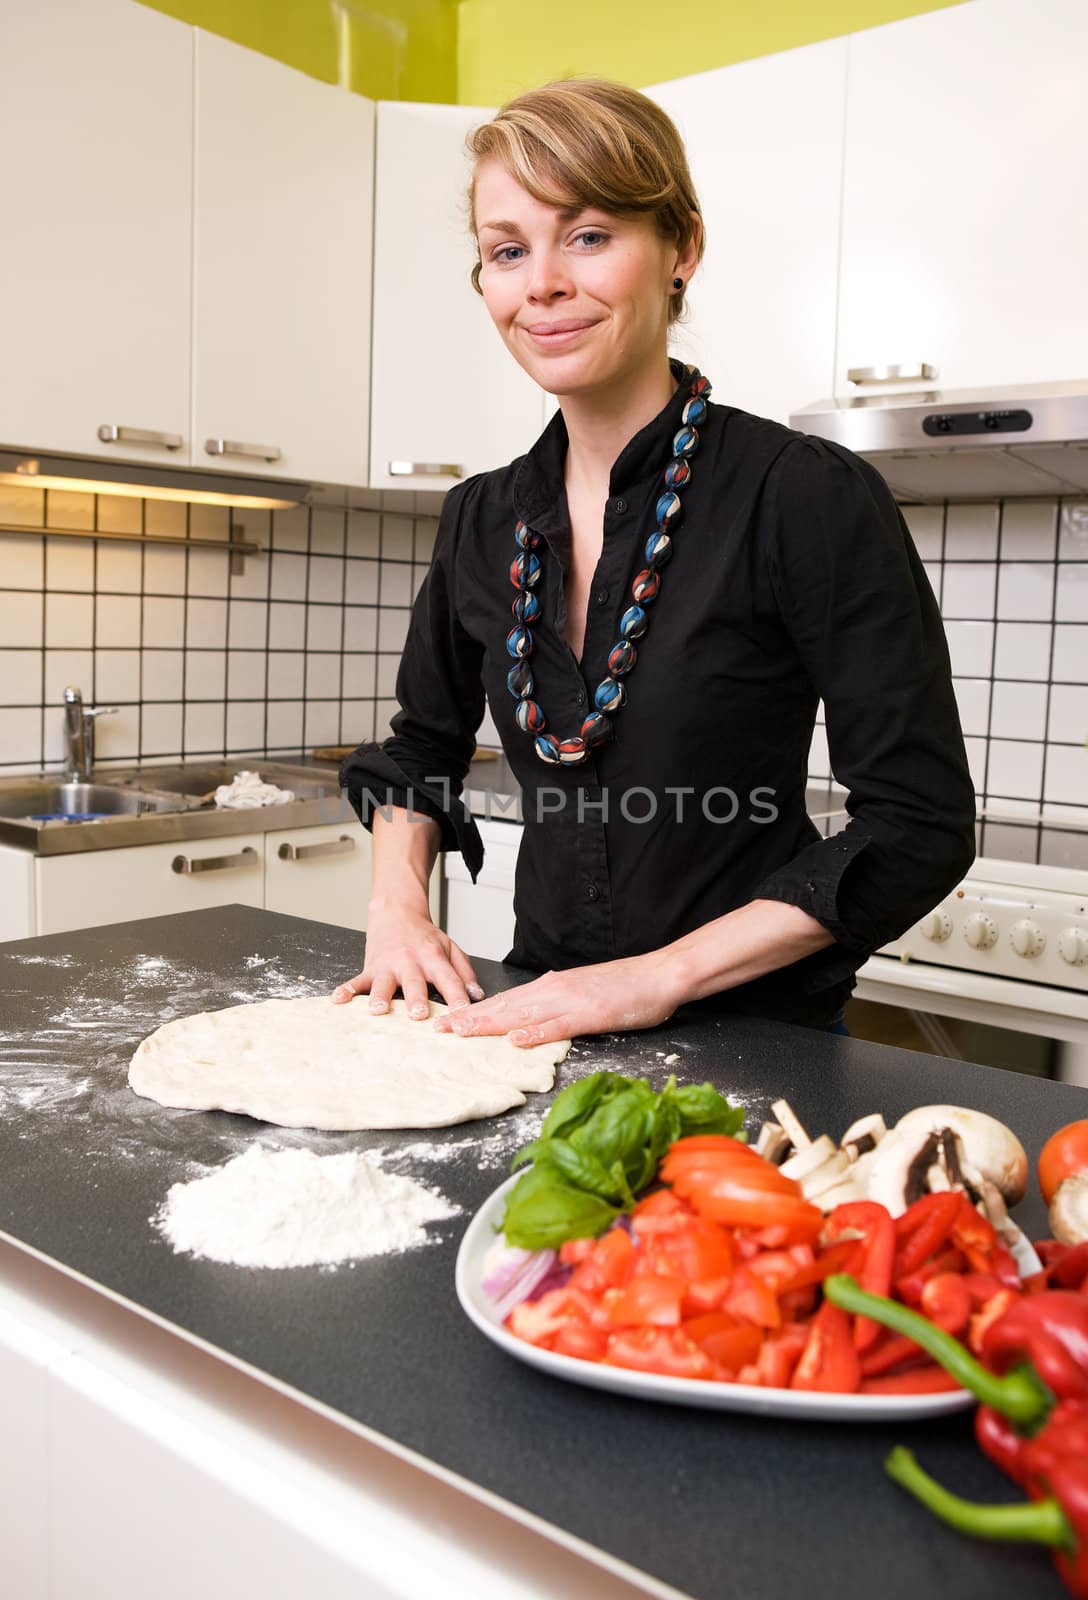 A young woman is making pizza dough on the kitchen counter at home in her apartment. Shallow depth of field with focus on the models face and hands.